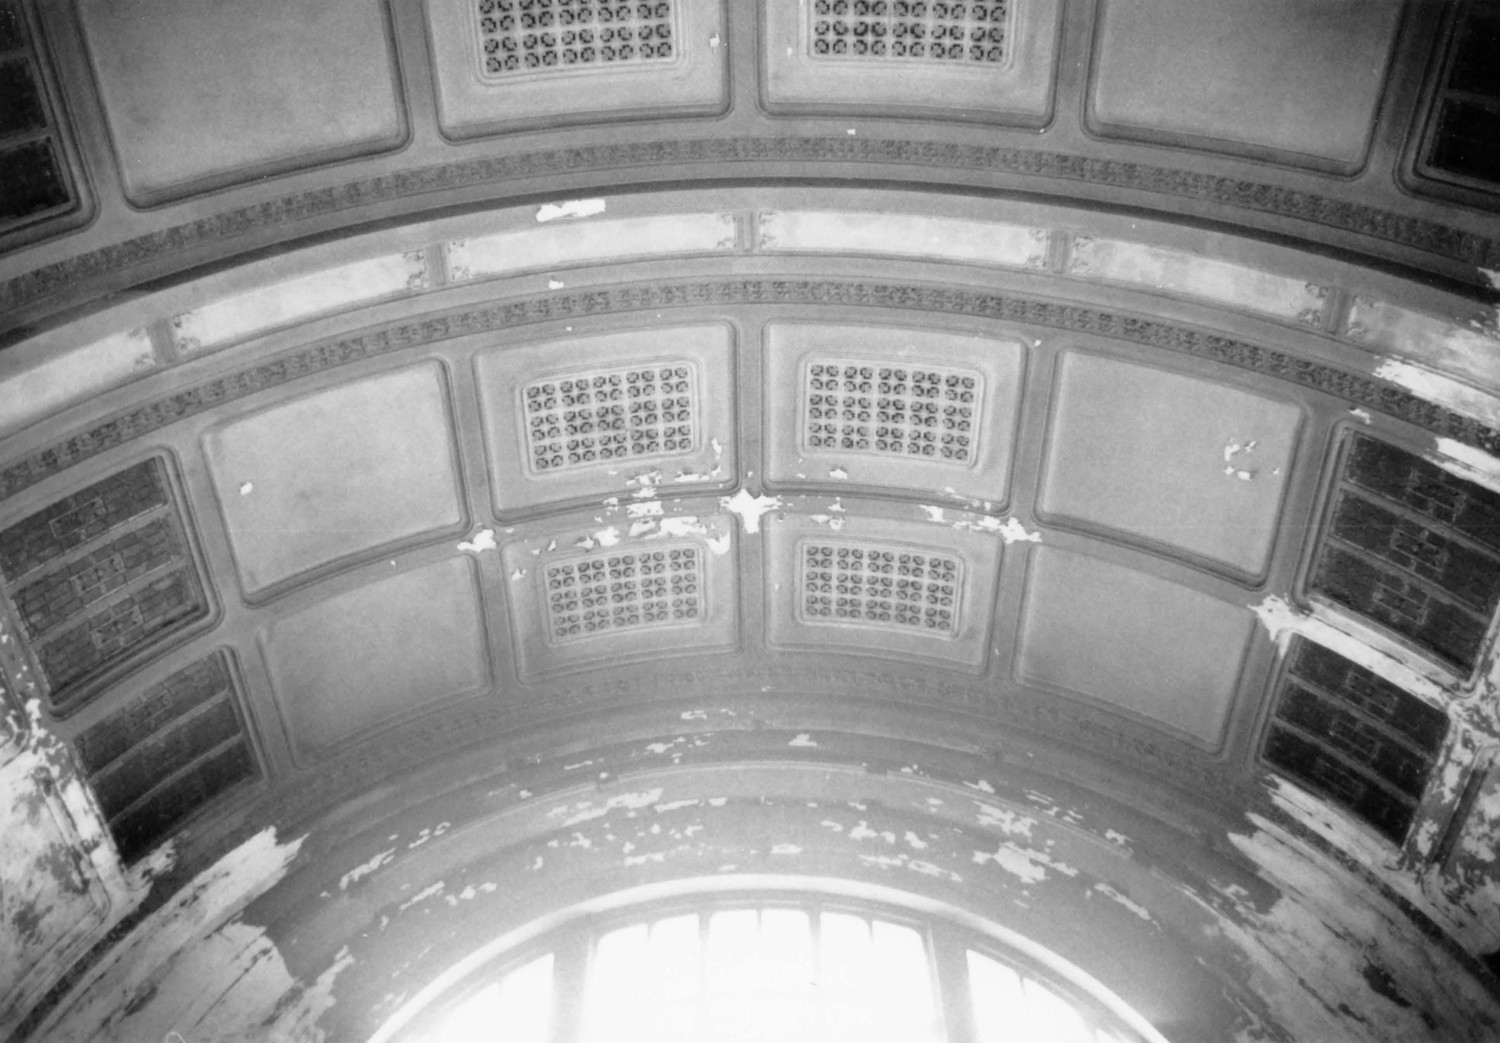 Pennsylvania Railroad Station - Baker Street Station, Fort Wayne Indiana Northernmost bay of the barrel-vaulted ceiling in the main concourse. (1997)